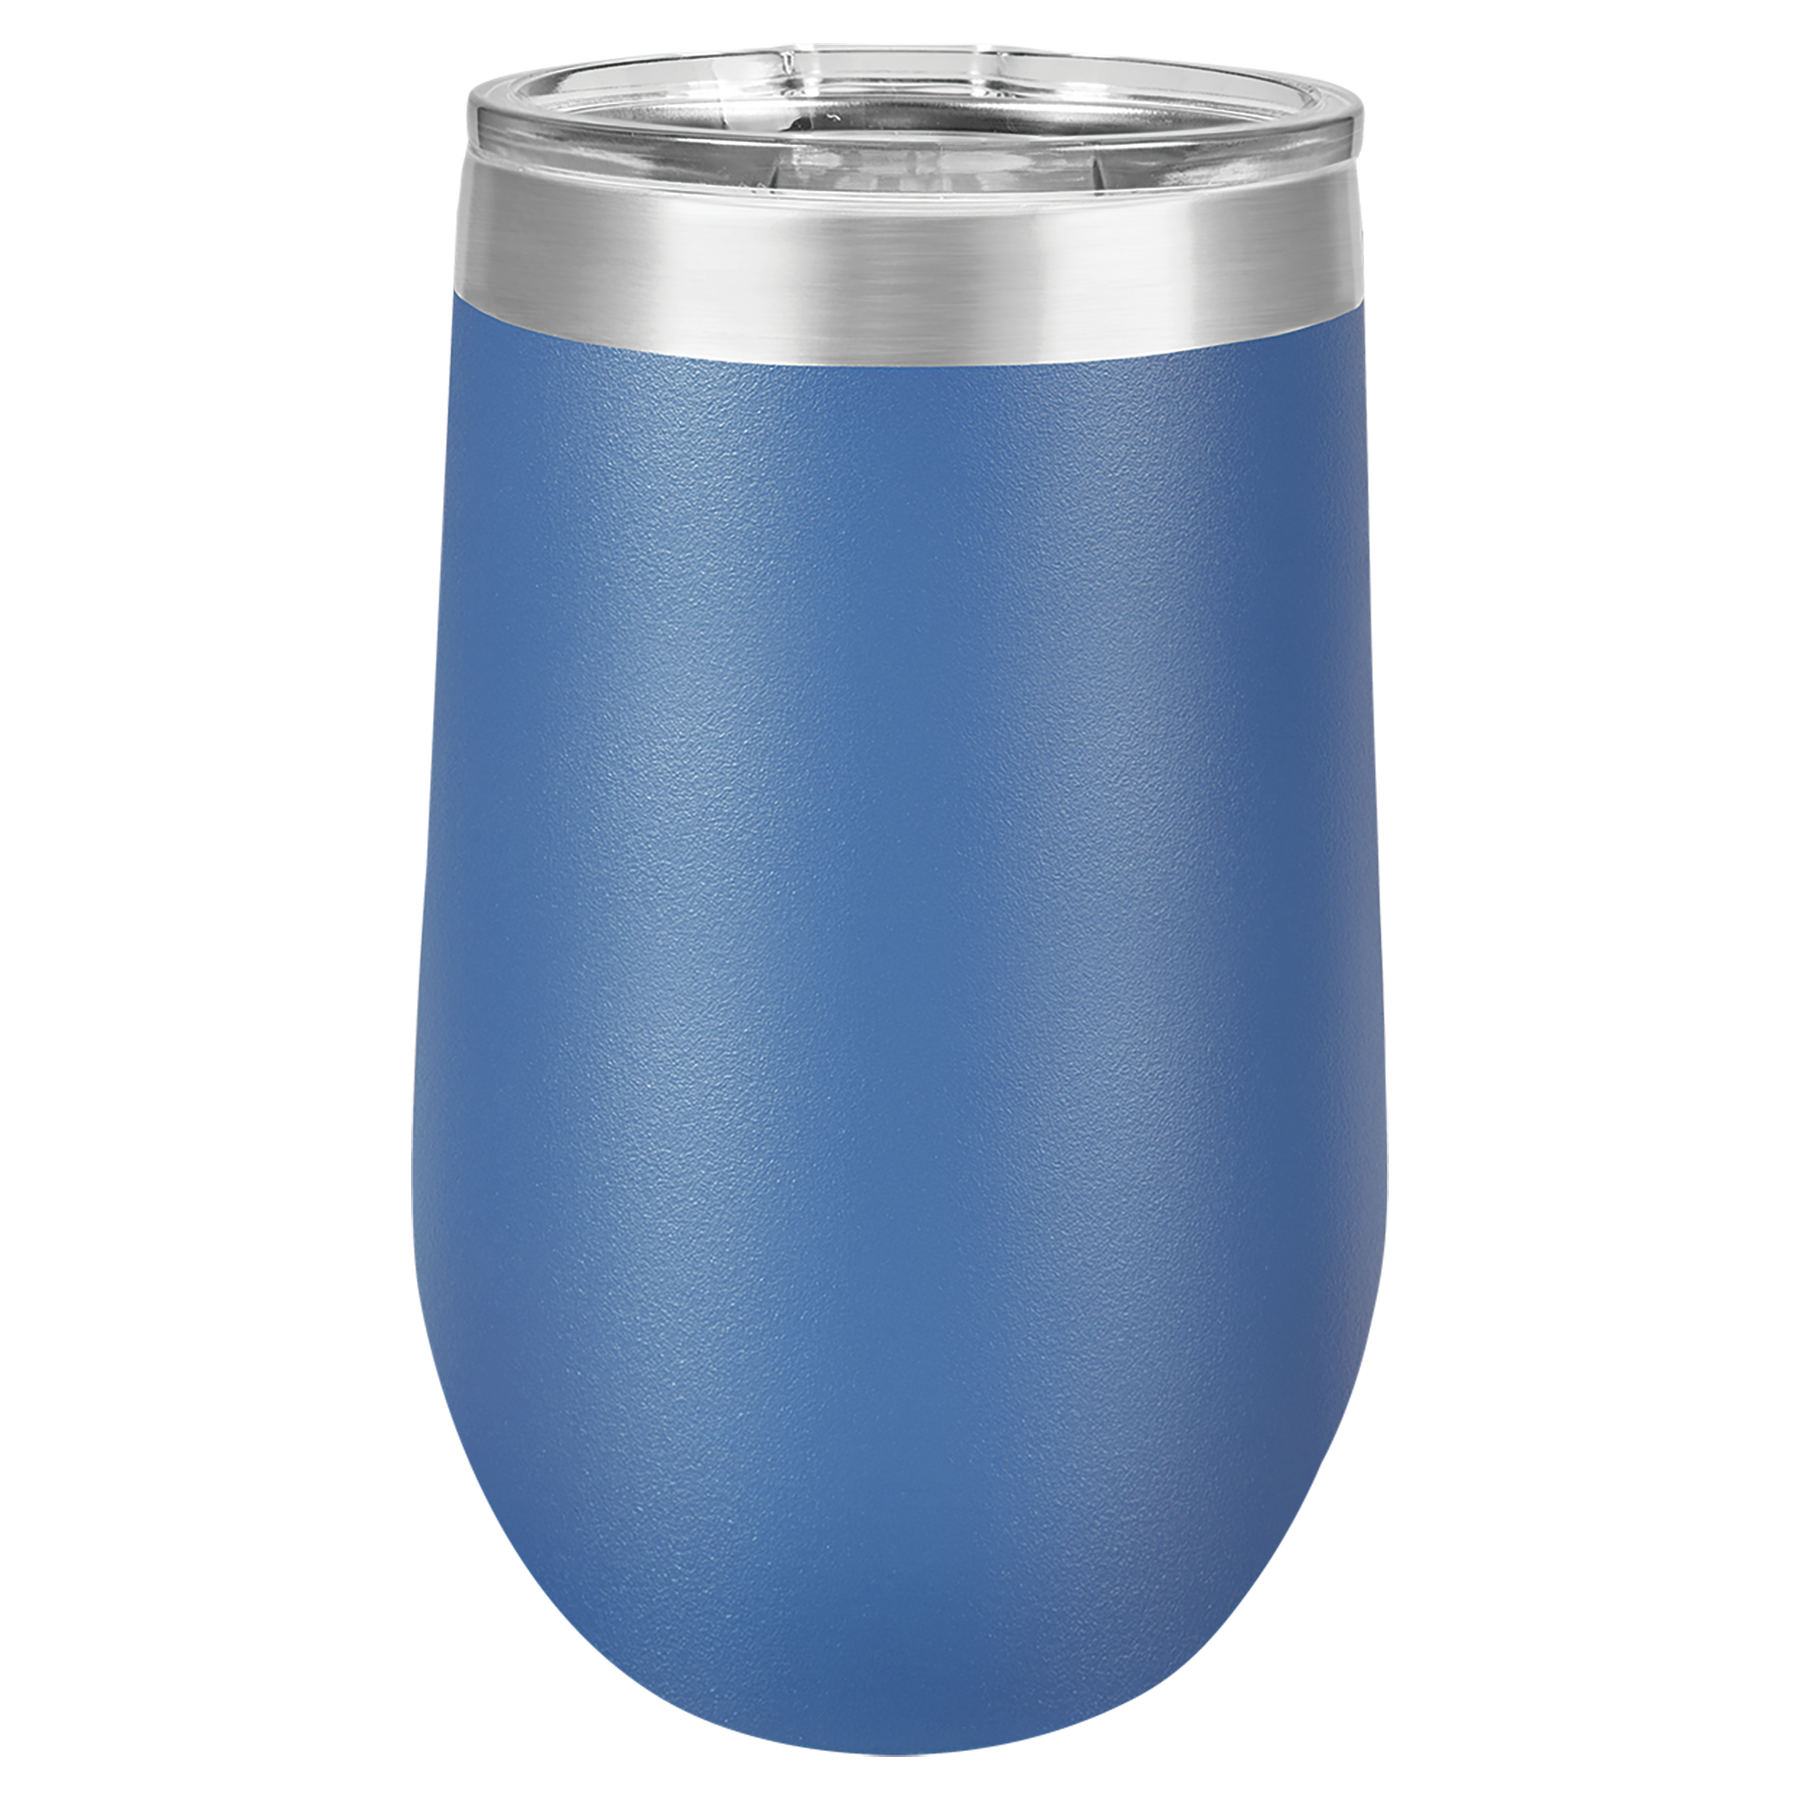 Royal Blue 16oz Stemless Wine Tumbler -One Free Engraving  -Double-wall Vacuum Insulated  -Made from 18/8 Gauge Stainless Steel (Type 304 Food Grade)  -Lid is BPA Free (Hand Wash Only)  -Not recommended for Dishwasher  -Works with Cold and Hot Drinks  -17 Color Options  -Perfect for Personalized Gifts, Awards, Incentives, Swag & Fundraisers